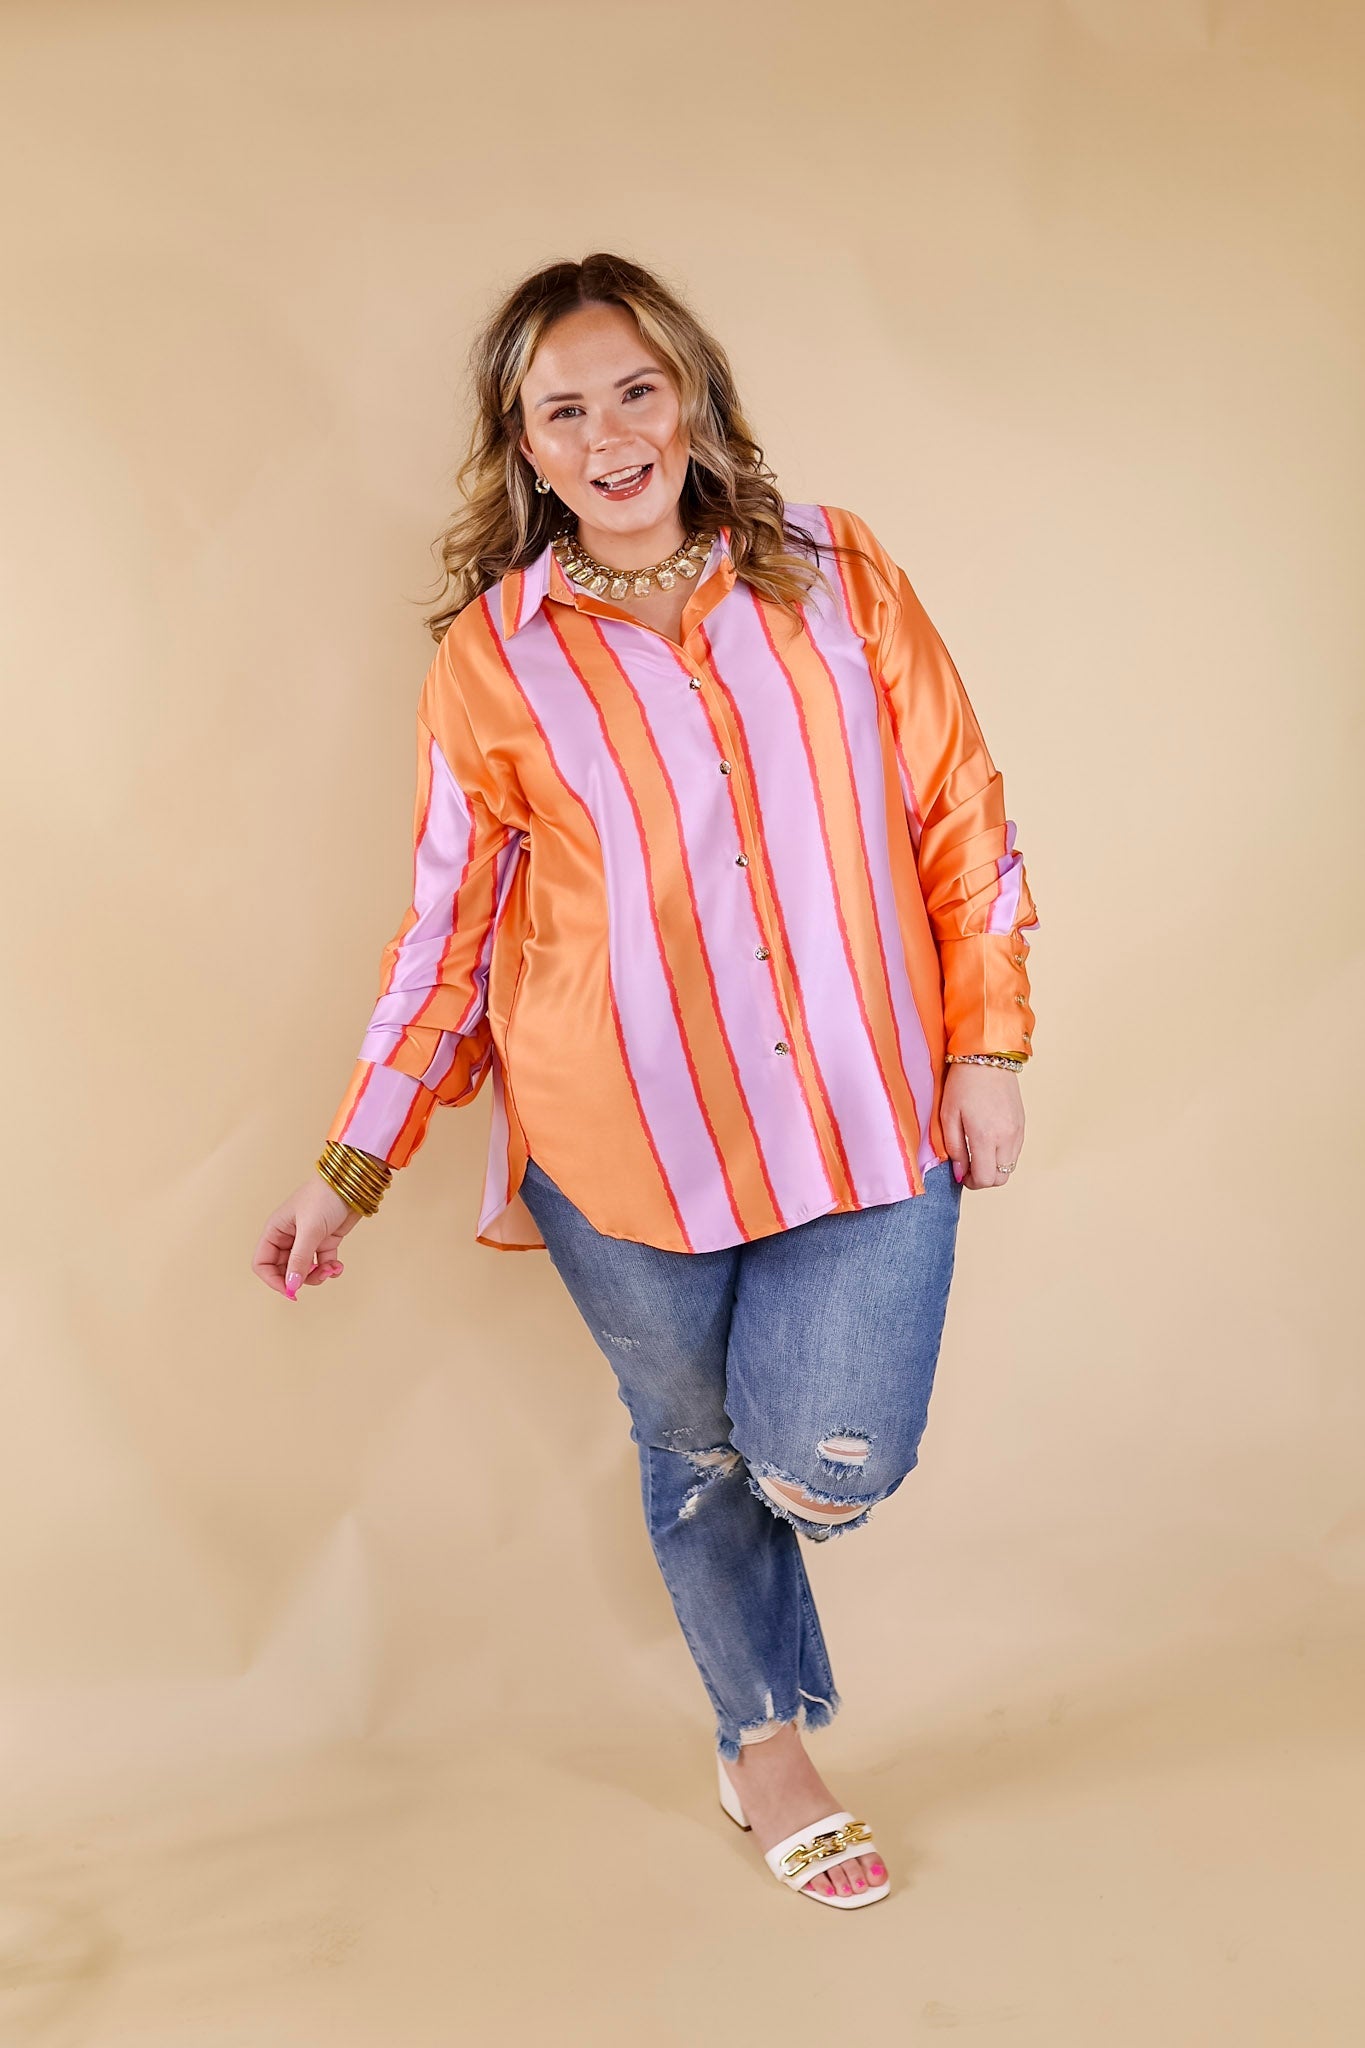 Match My Energy Striped Button Up Top in Lavender Purple and Orange - Giddy Up Glamour Boutique